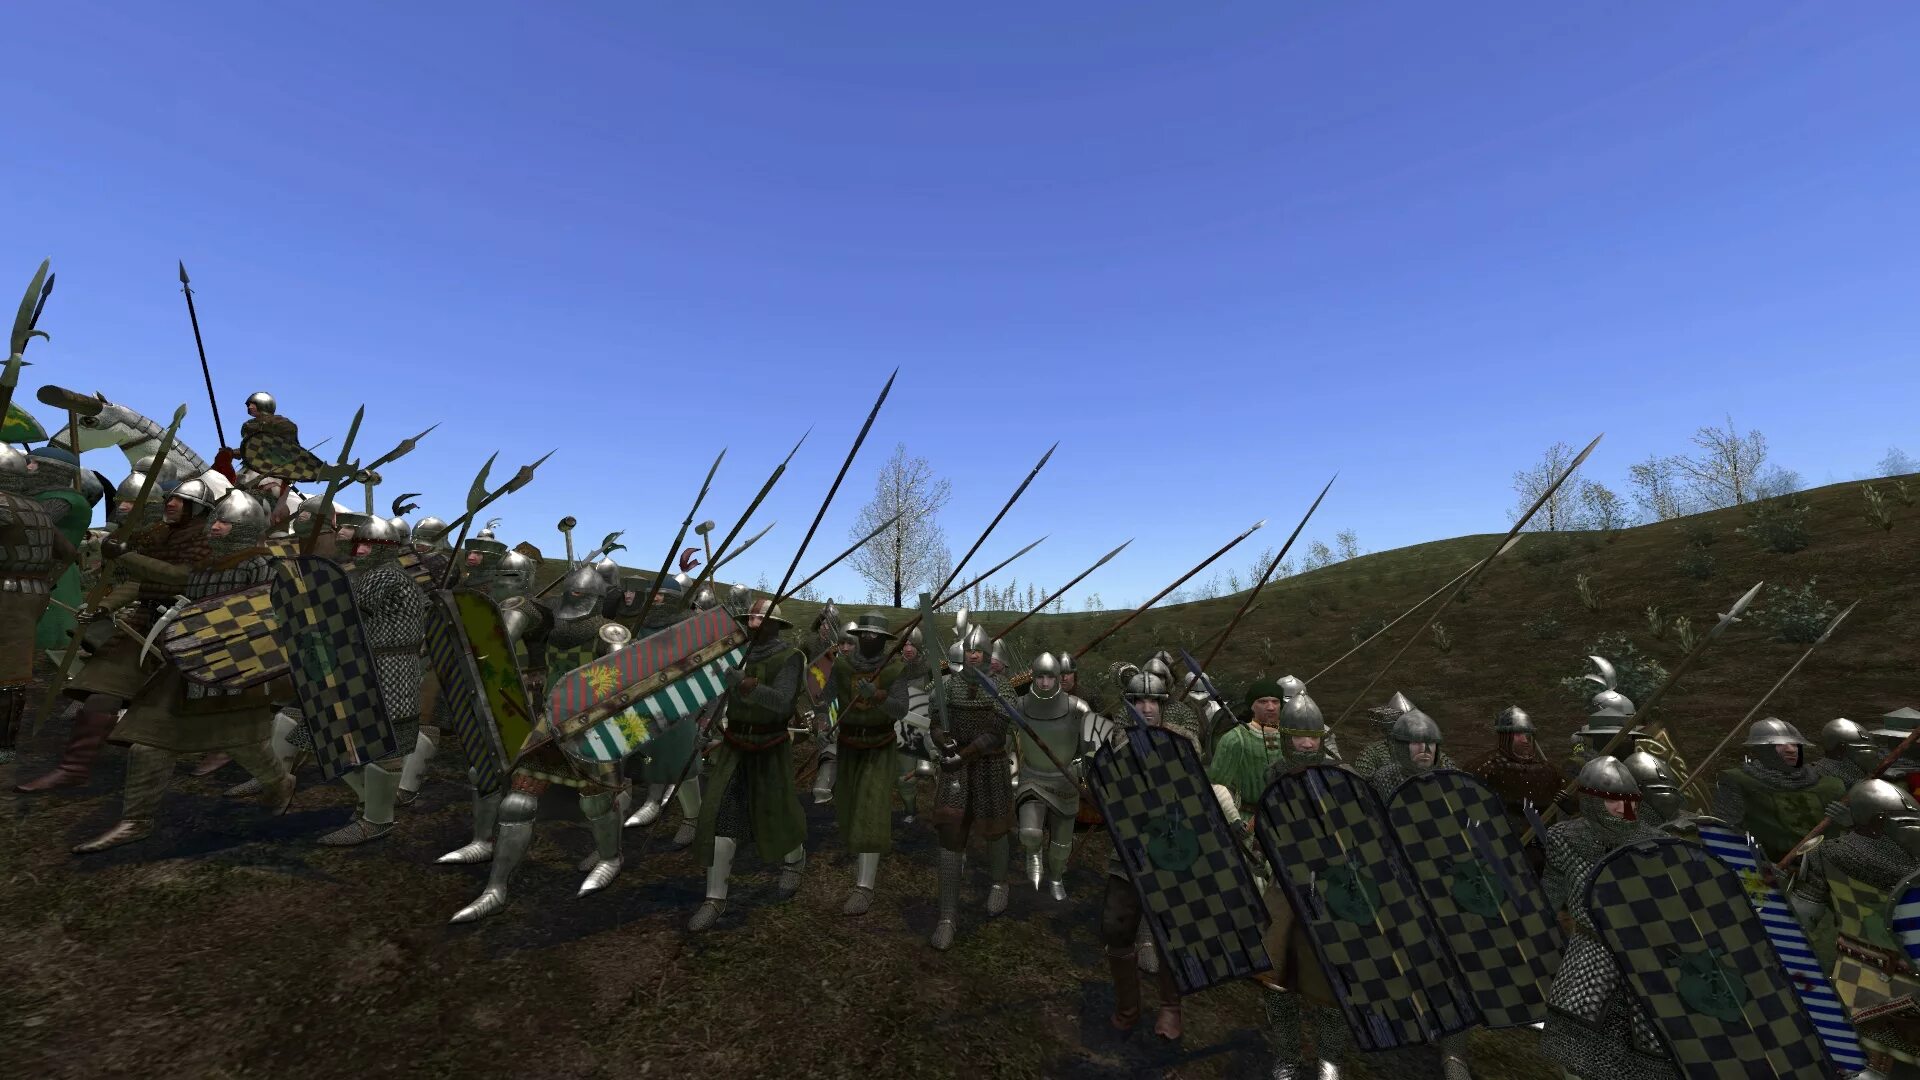 Mount and Blade сражение. Варбанд 2. Северный городок Маунт энд блейд. Mount and Blade Warband a New Dawn. Warband helldivers